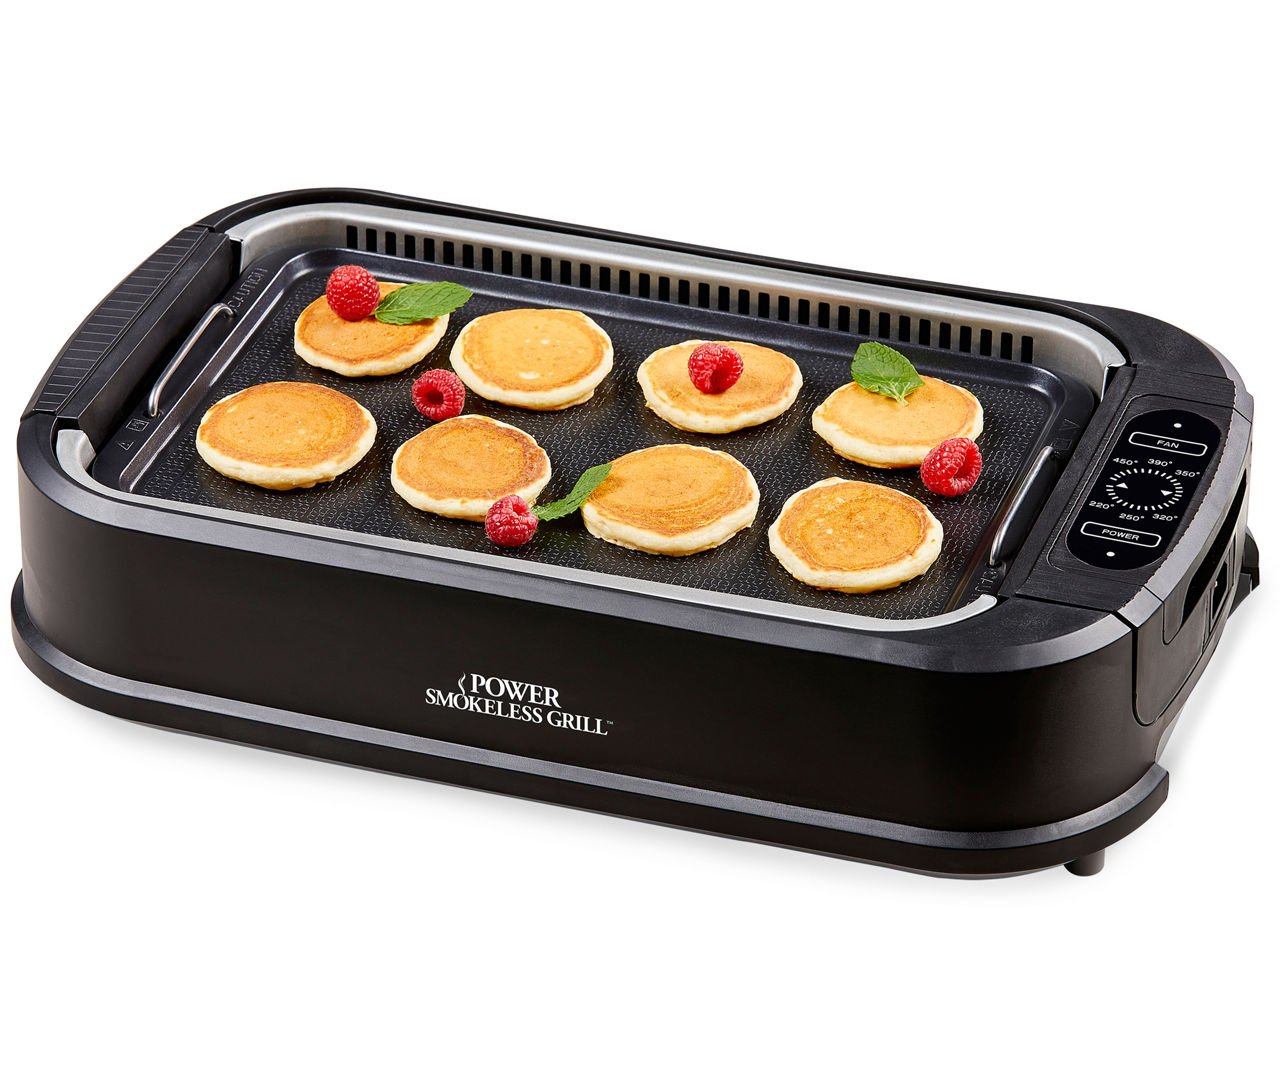 Power Smokeless Indoor Electric Grill New Open Box. As Seen On TV Nonstick